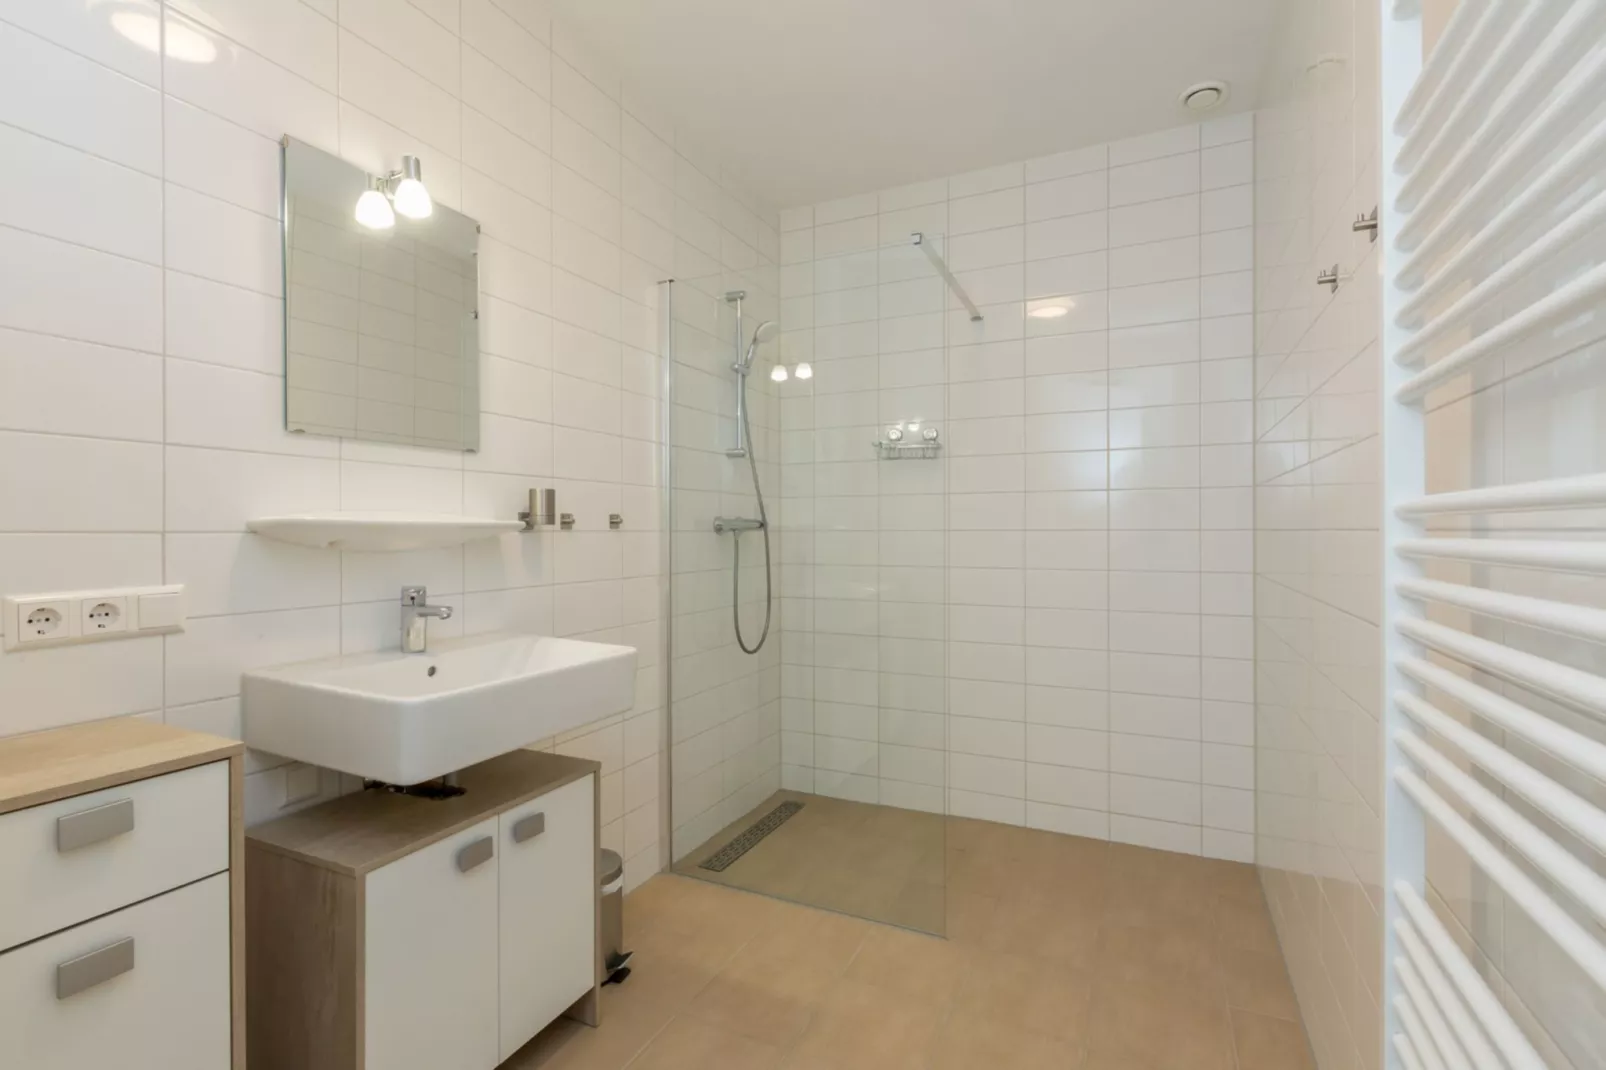 Aparthotel Zoutelande - 4 pers luxe appartement-Badkamer